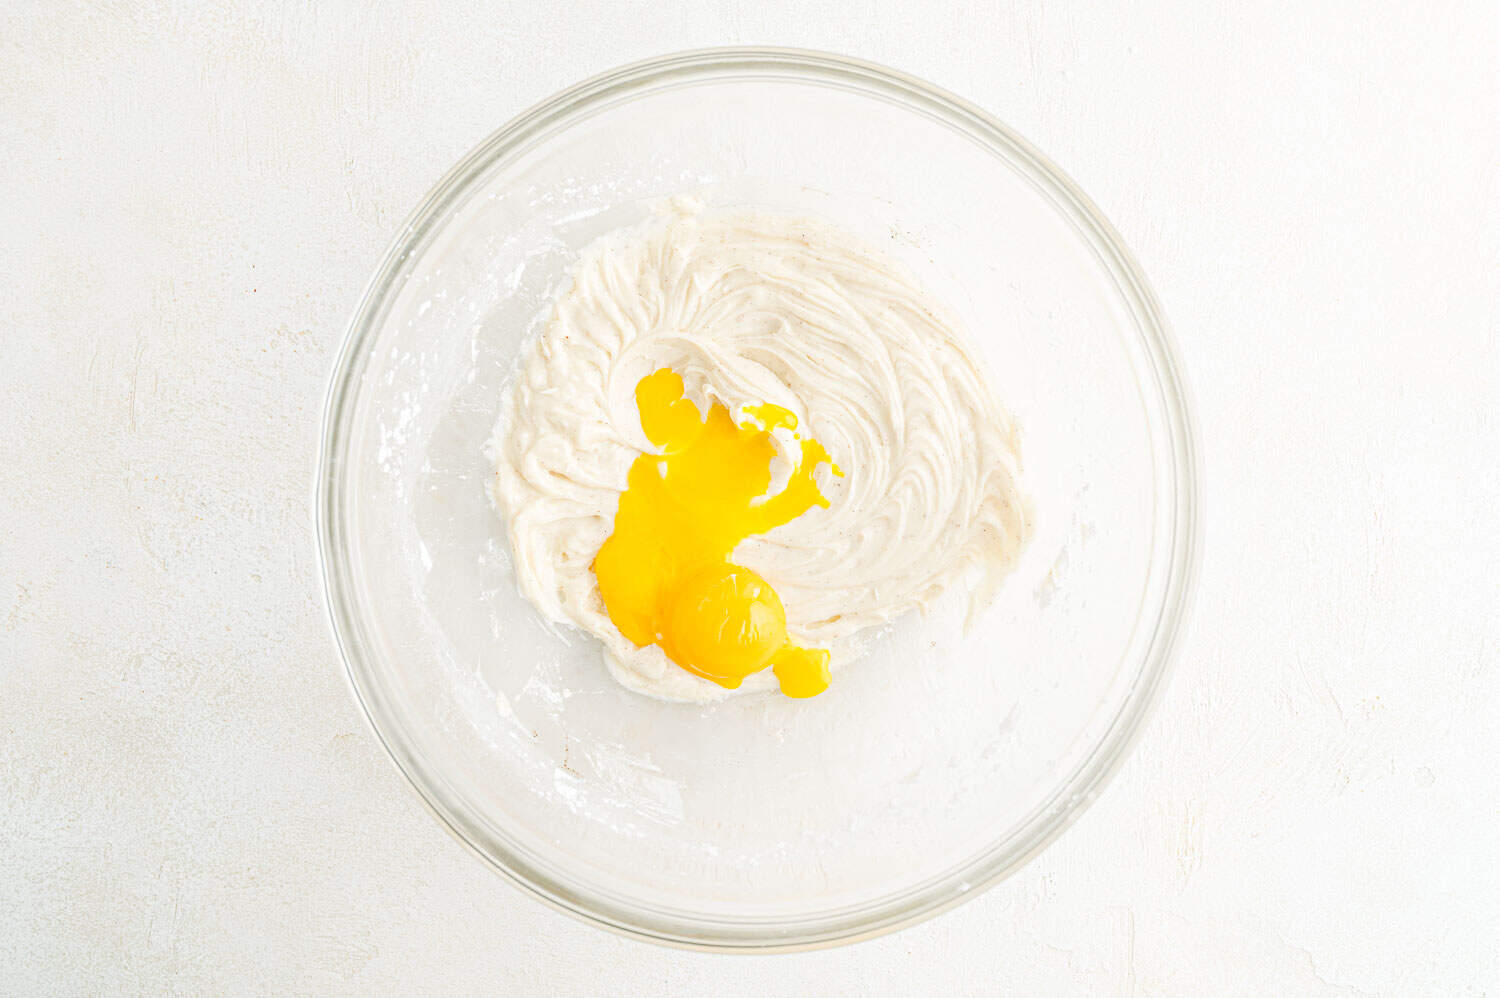 Eggs added to butter and sugar.